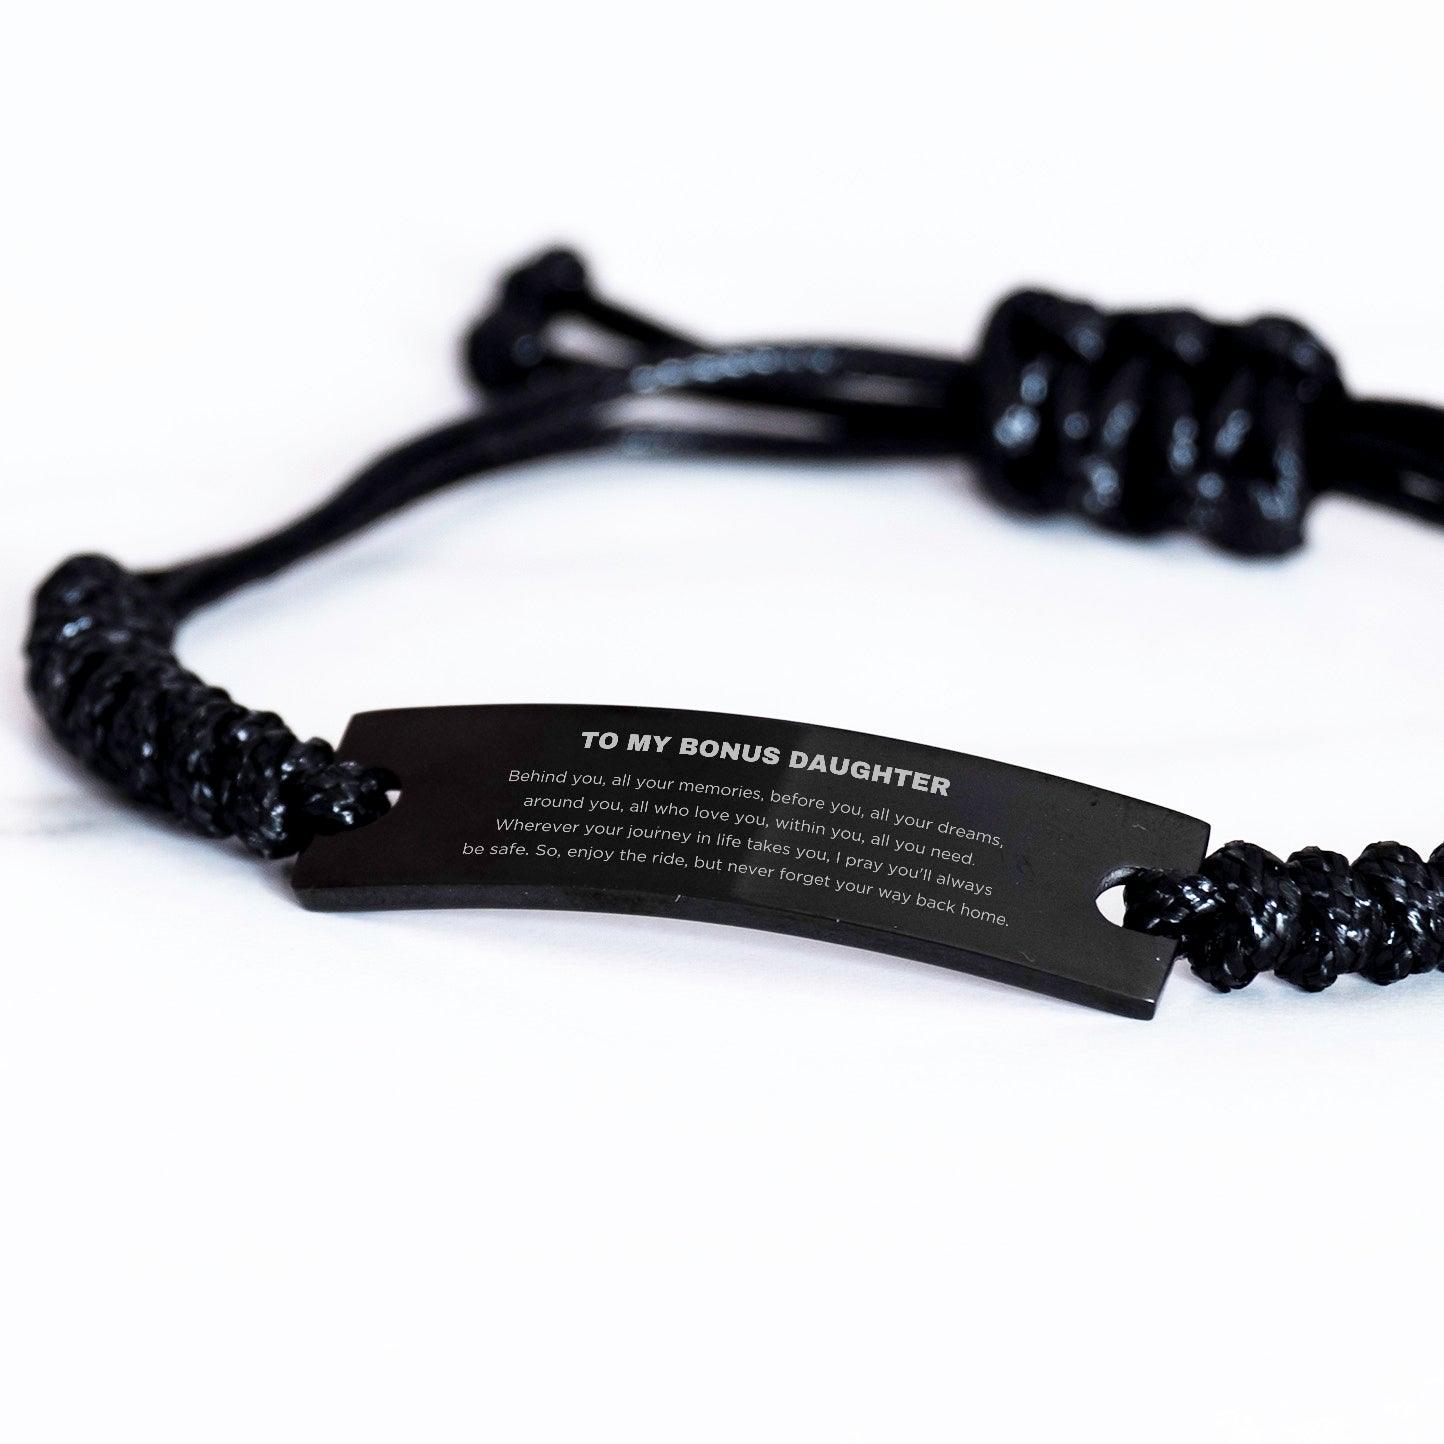 Bonus Daughter Inspirational Black Rope Leather Engraved Bracelet Birthday Christmas Gifts - Behind you, all your memories, before you, all your dreams, around you, all who love you, within you, all you need - Mallard Moon Gift Shop